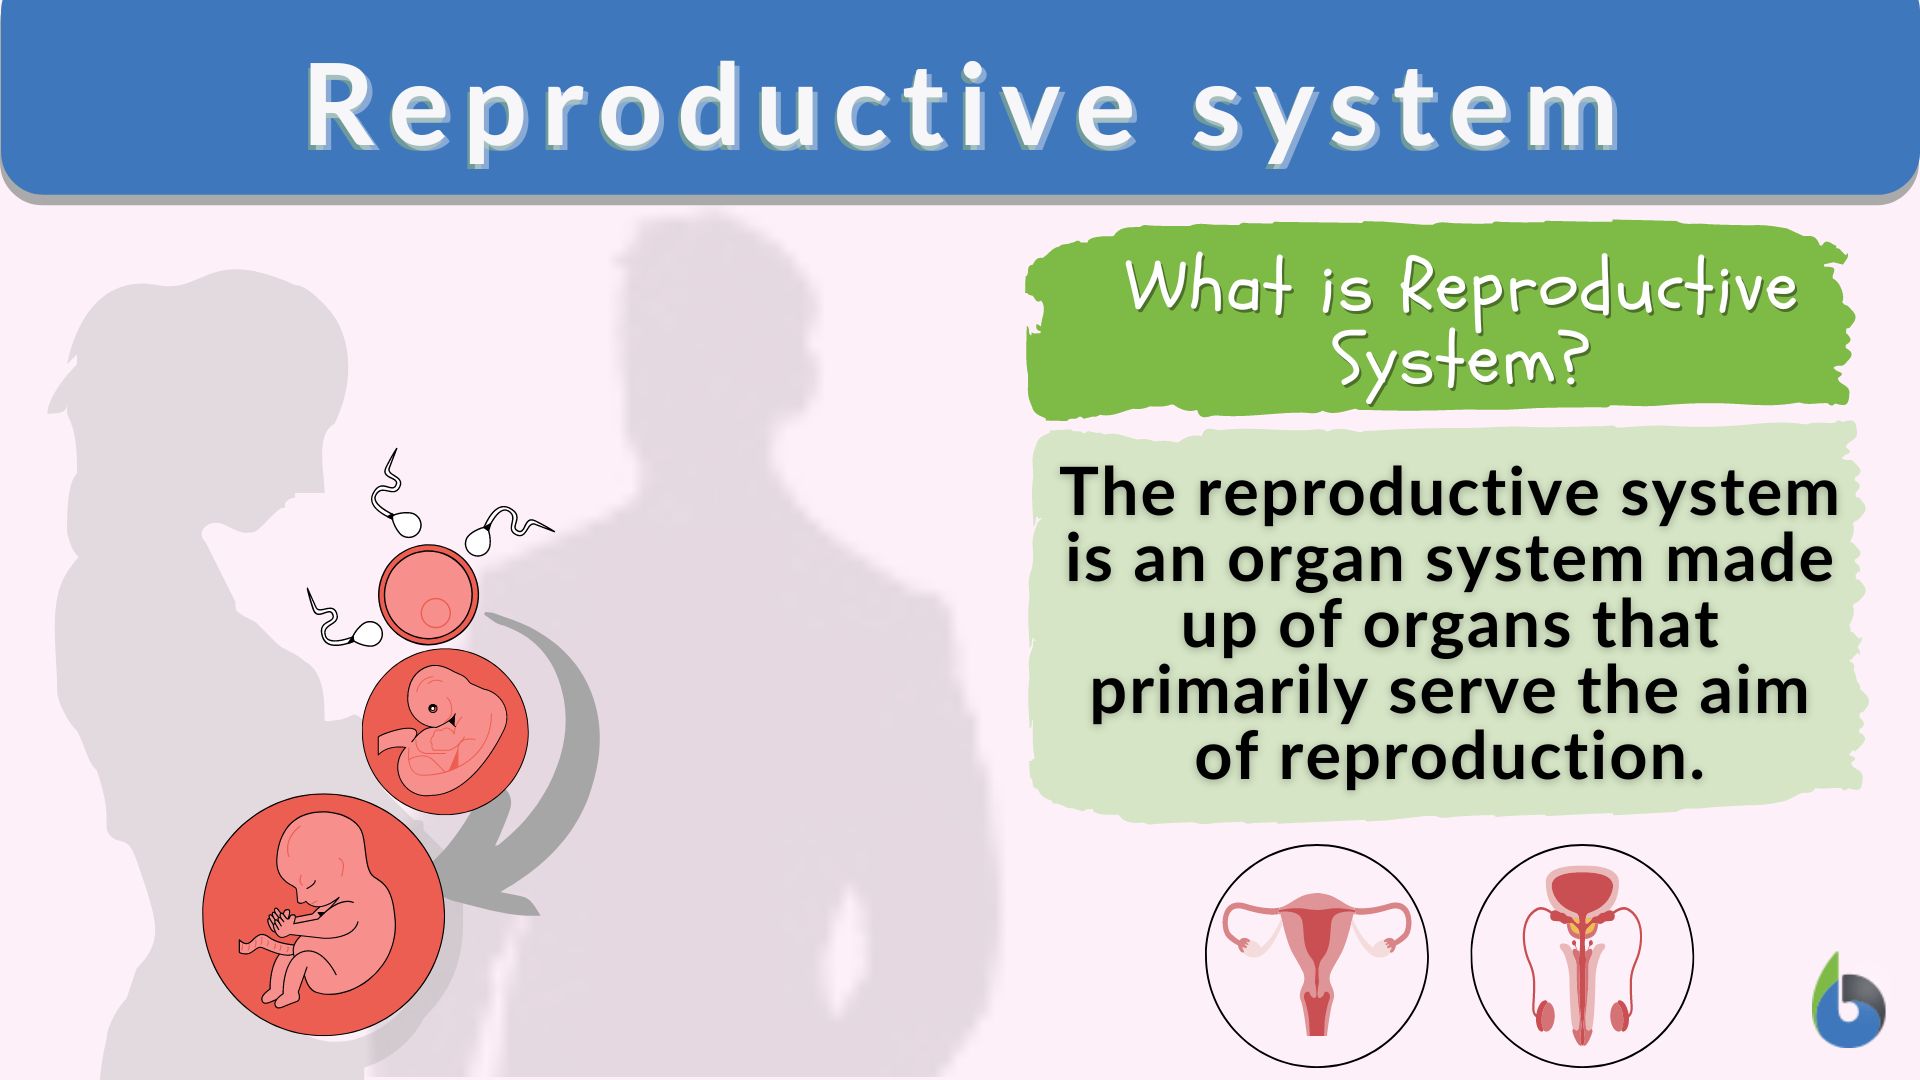 Reproductive system - Definition and Examples pic